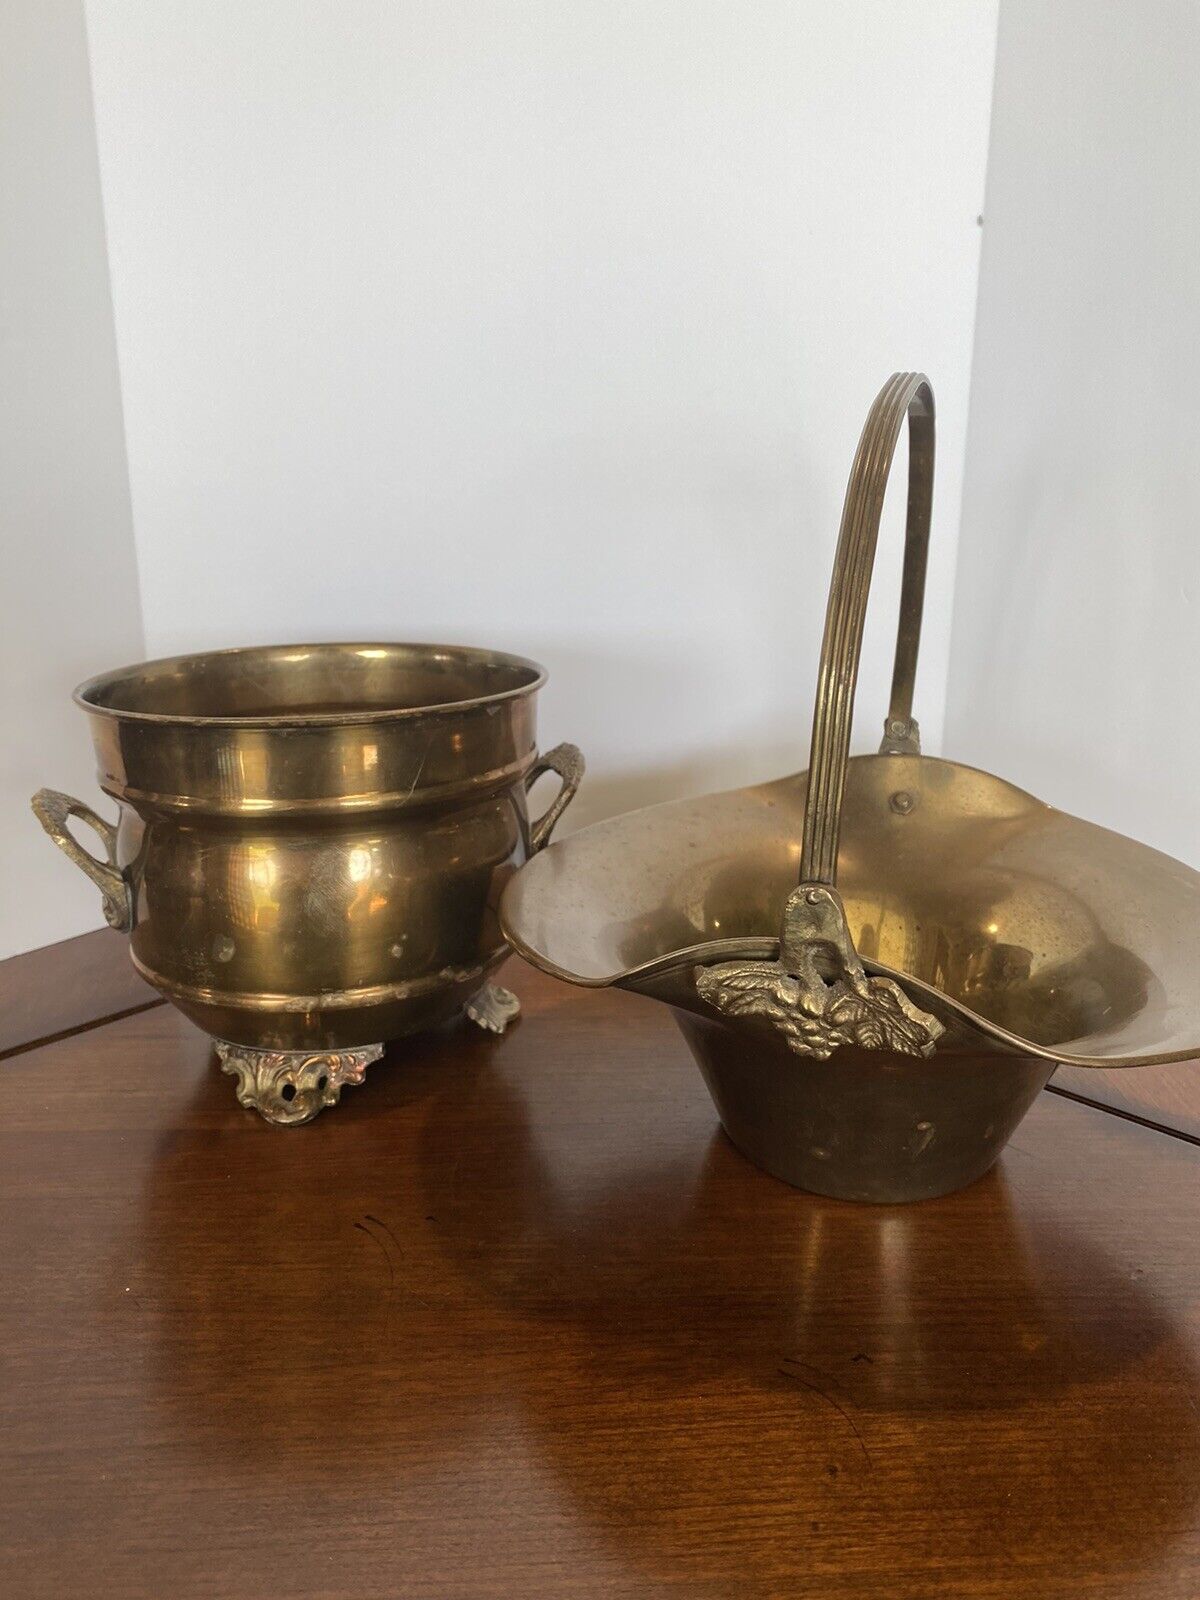 Vtg Brass Basket Swing Handle AND Handled Footed Brass Planter Lot Of 2 Patina